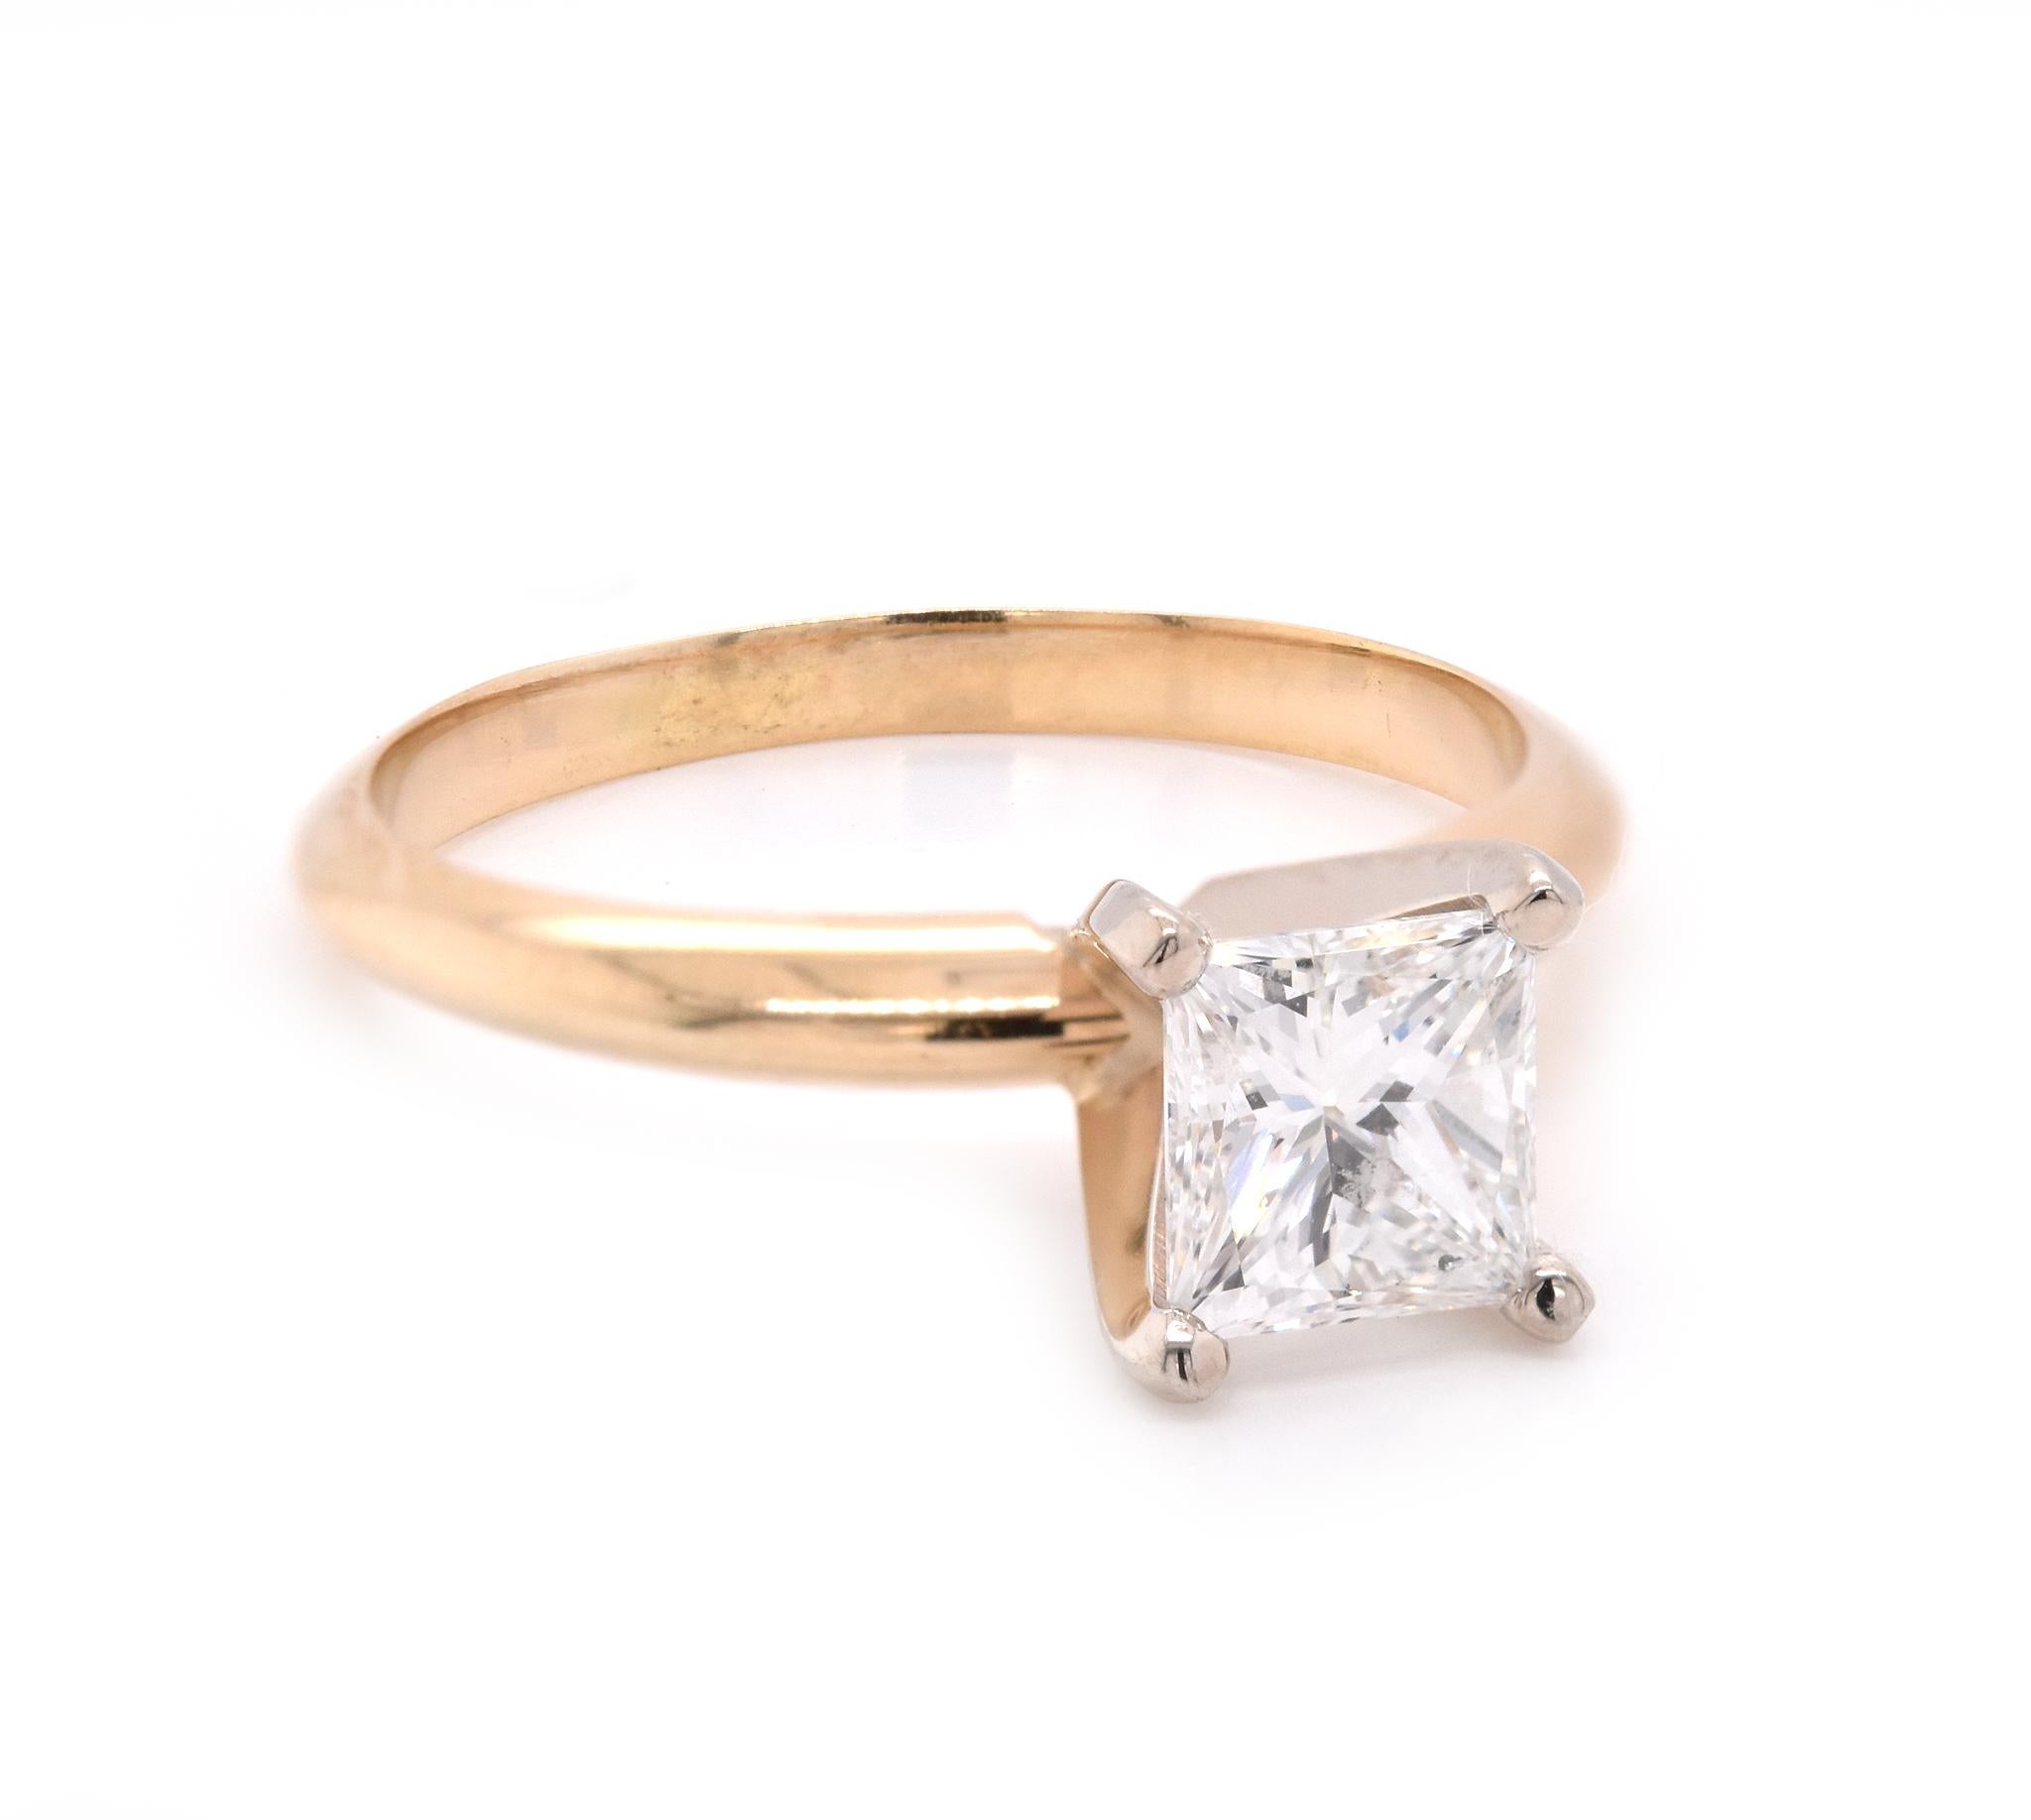 Material: 14k yellow gold
Center Diamond: 1 princess cut = 1.00ct
Color: I
Clarity: VS2
Ring Size: 5.75 (please allow up to 2 additional business days for sizing requests)
Dimensions: ring shank measures 2mm
Weight: 2.51 grams
